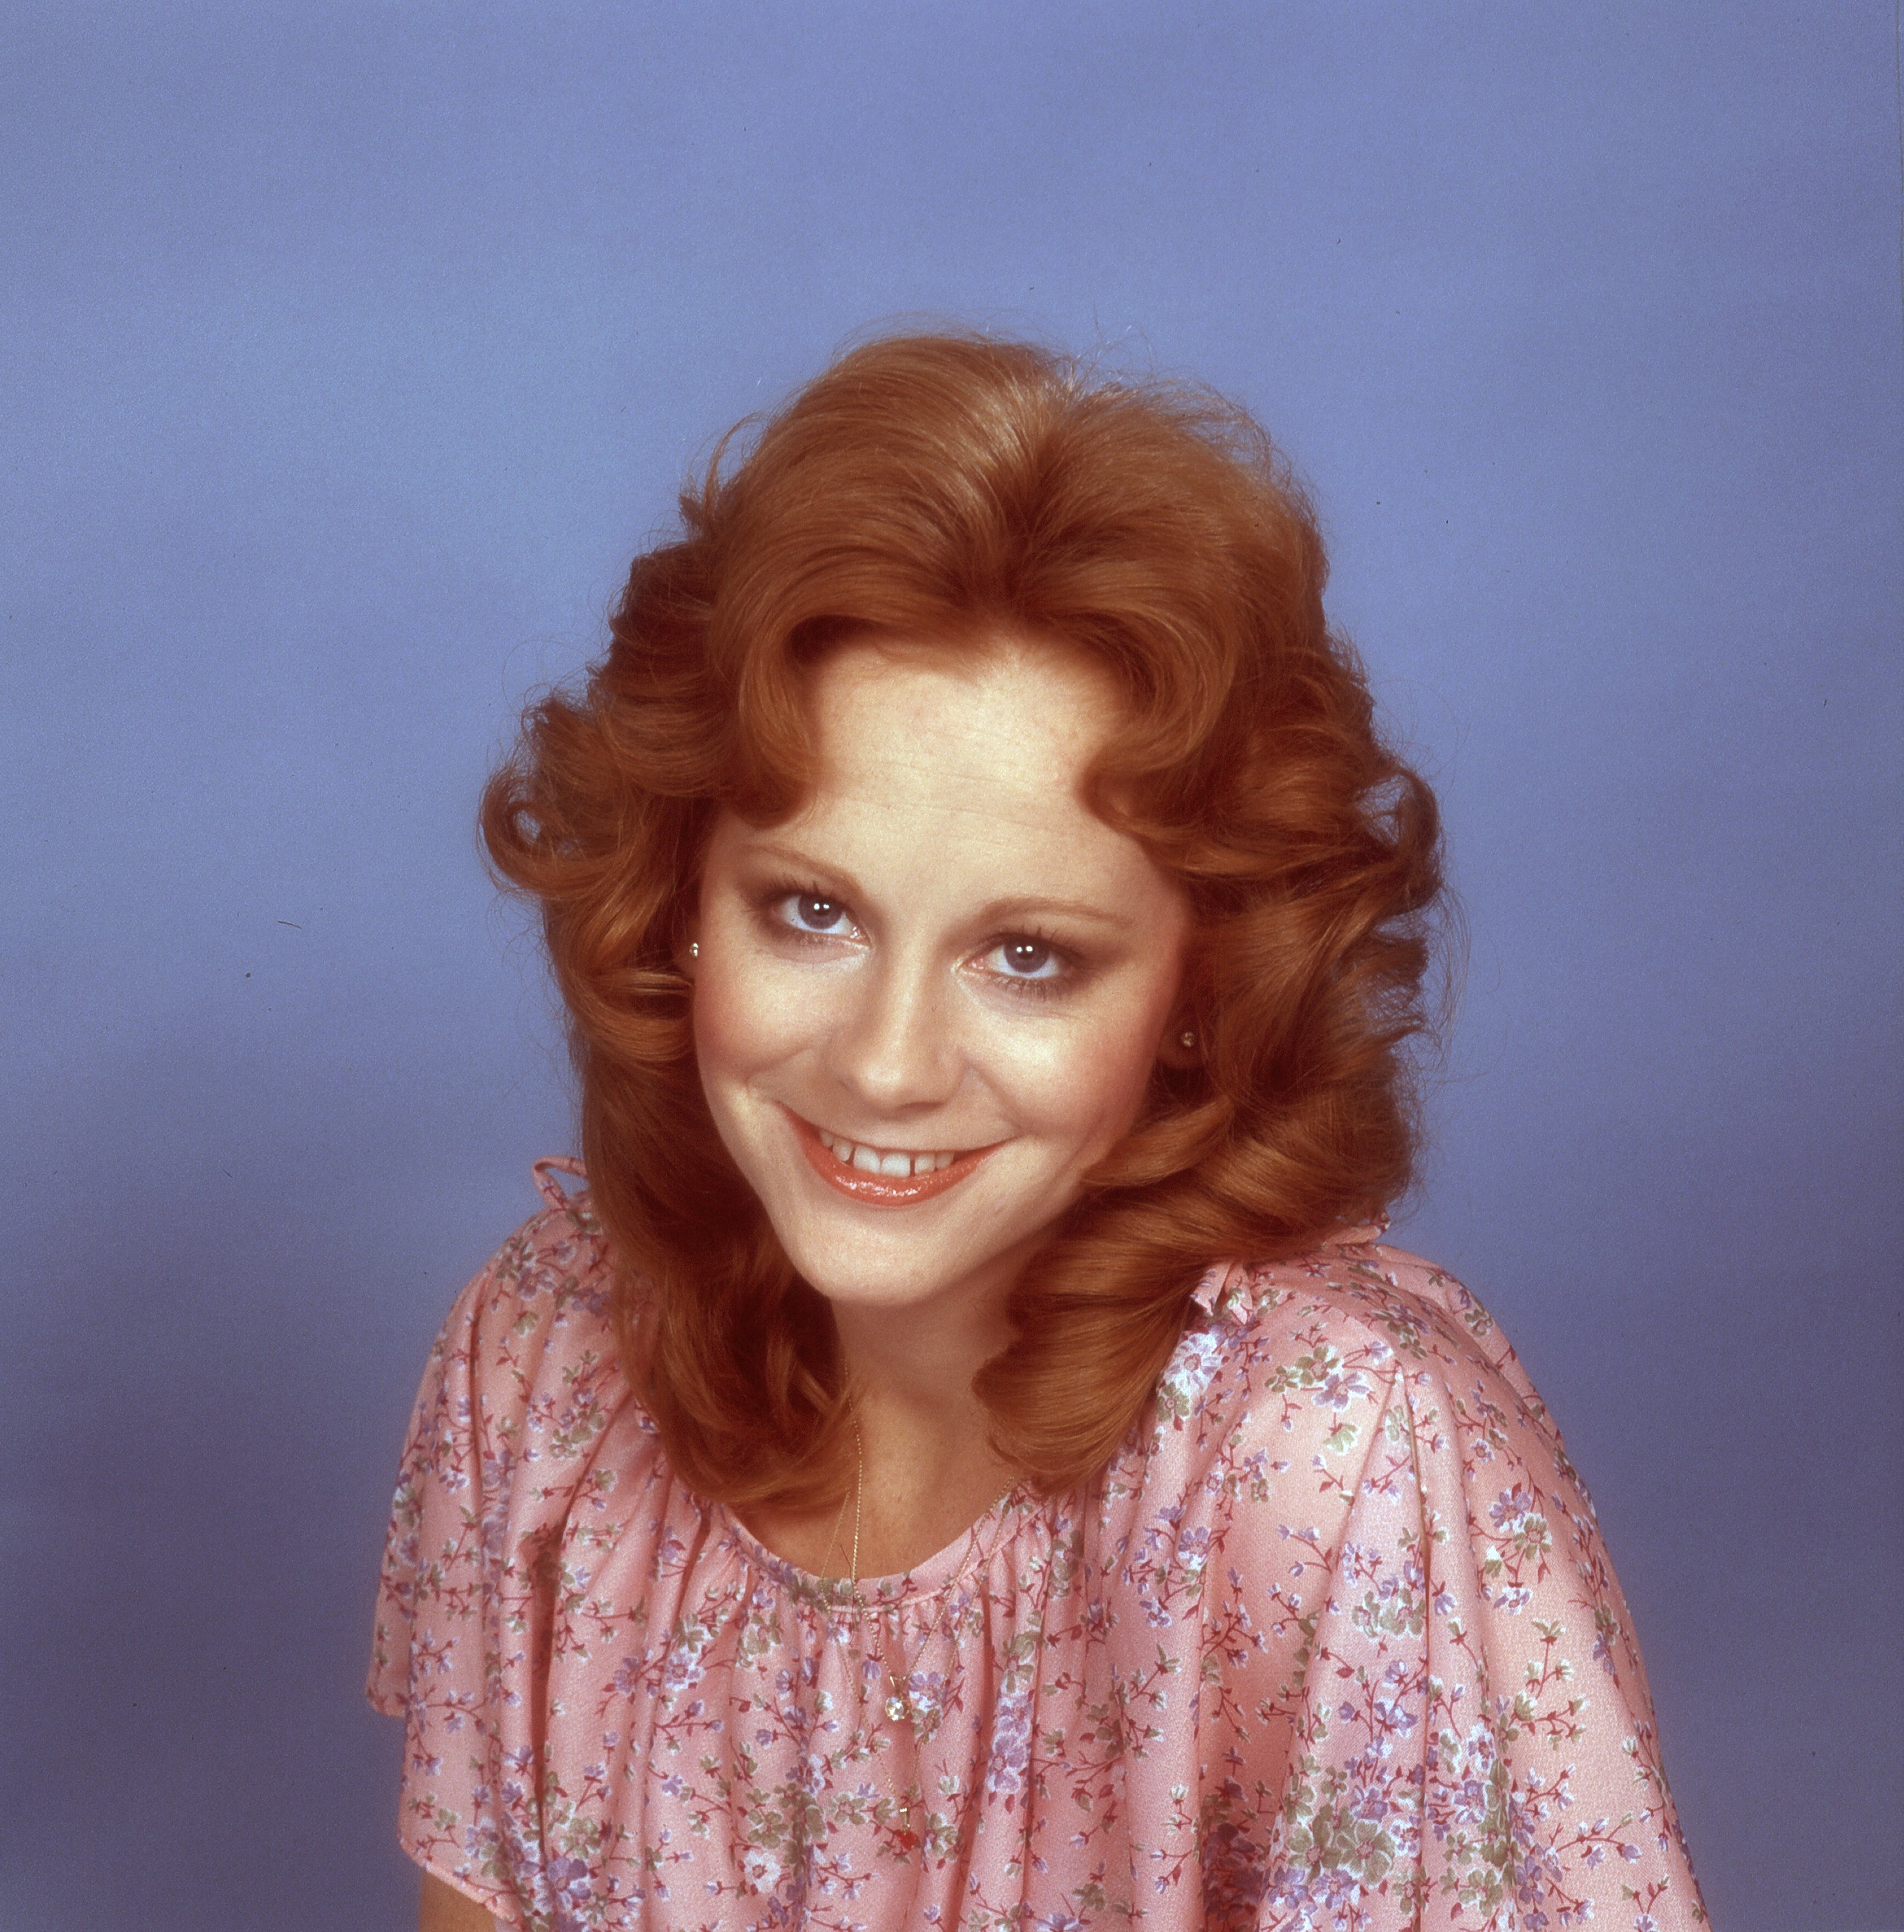 Country singer Reba McEntire poses for a portrait session in Nashville, Tennessee in circa 1976. | Photo: Getty Images